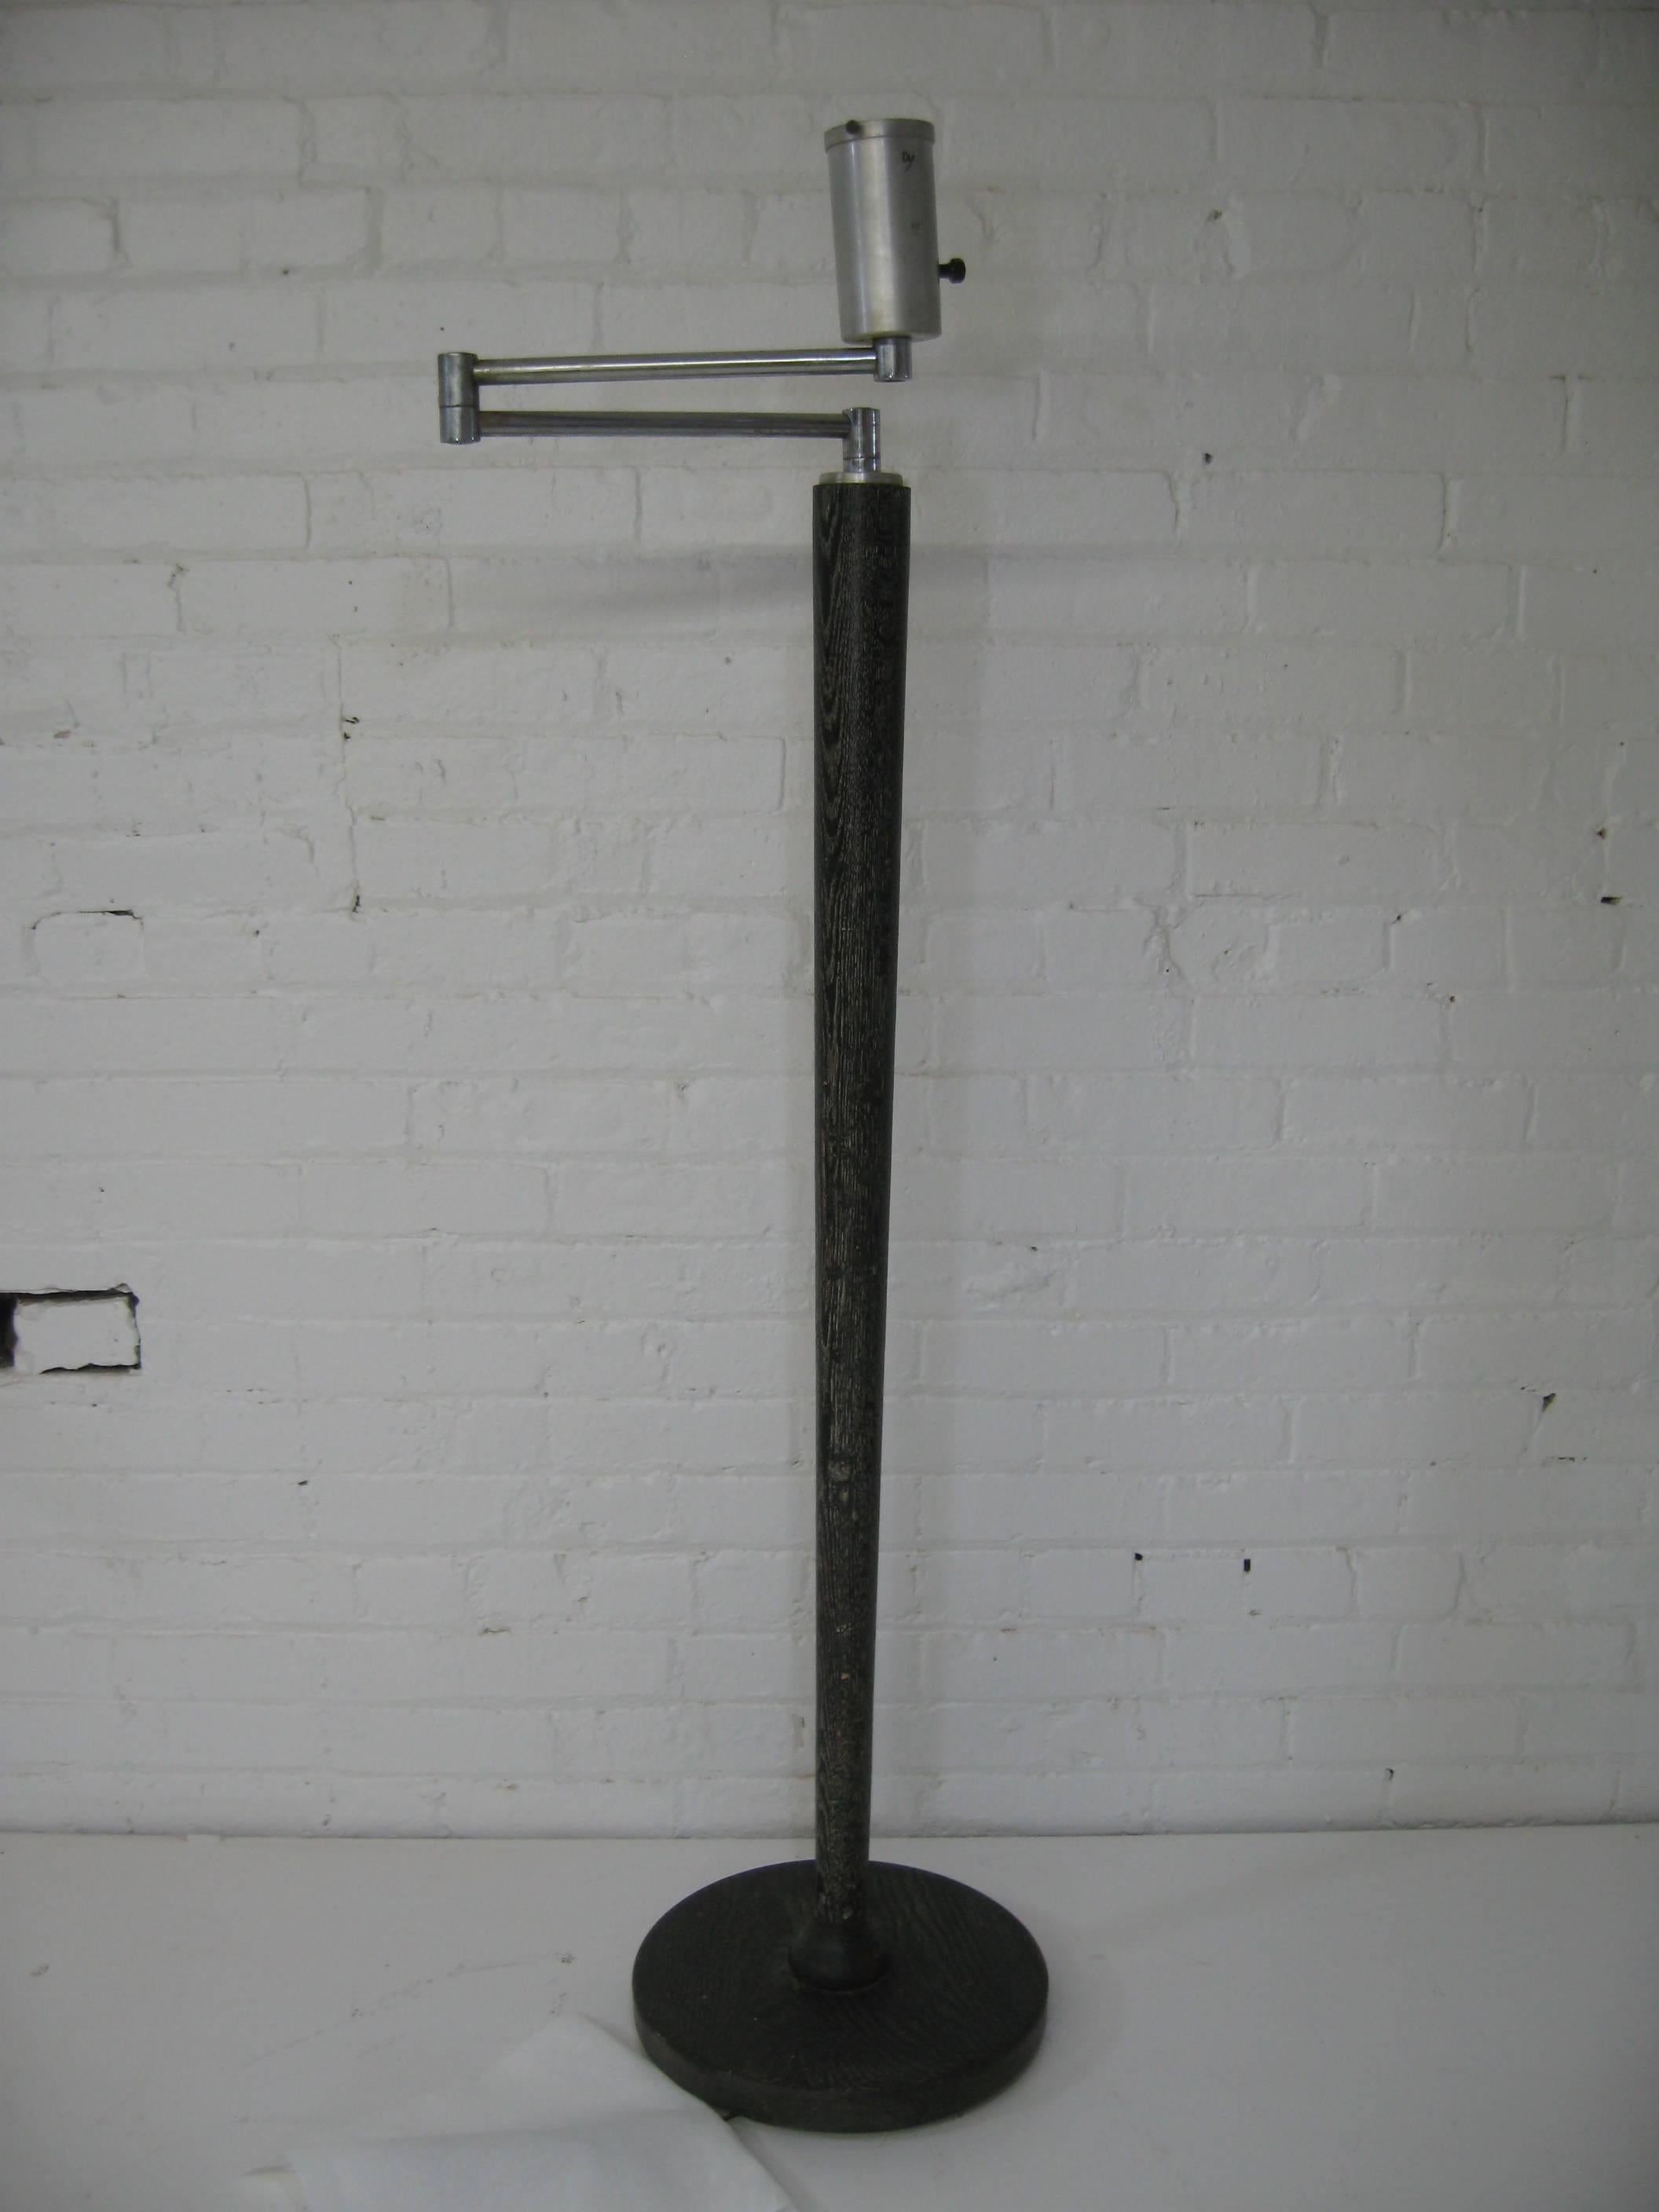 Moderne cerused and limed oak floor lamp, circa 1950. Large open oak grain is pronounced in white and contrasted in black. Tapered shaft design. Weighted iron base. Nickel extending and adjustable arm. No shade or diffuser, but has been re-wired.